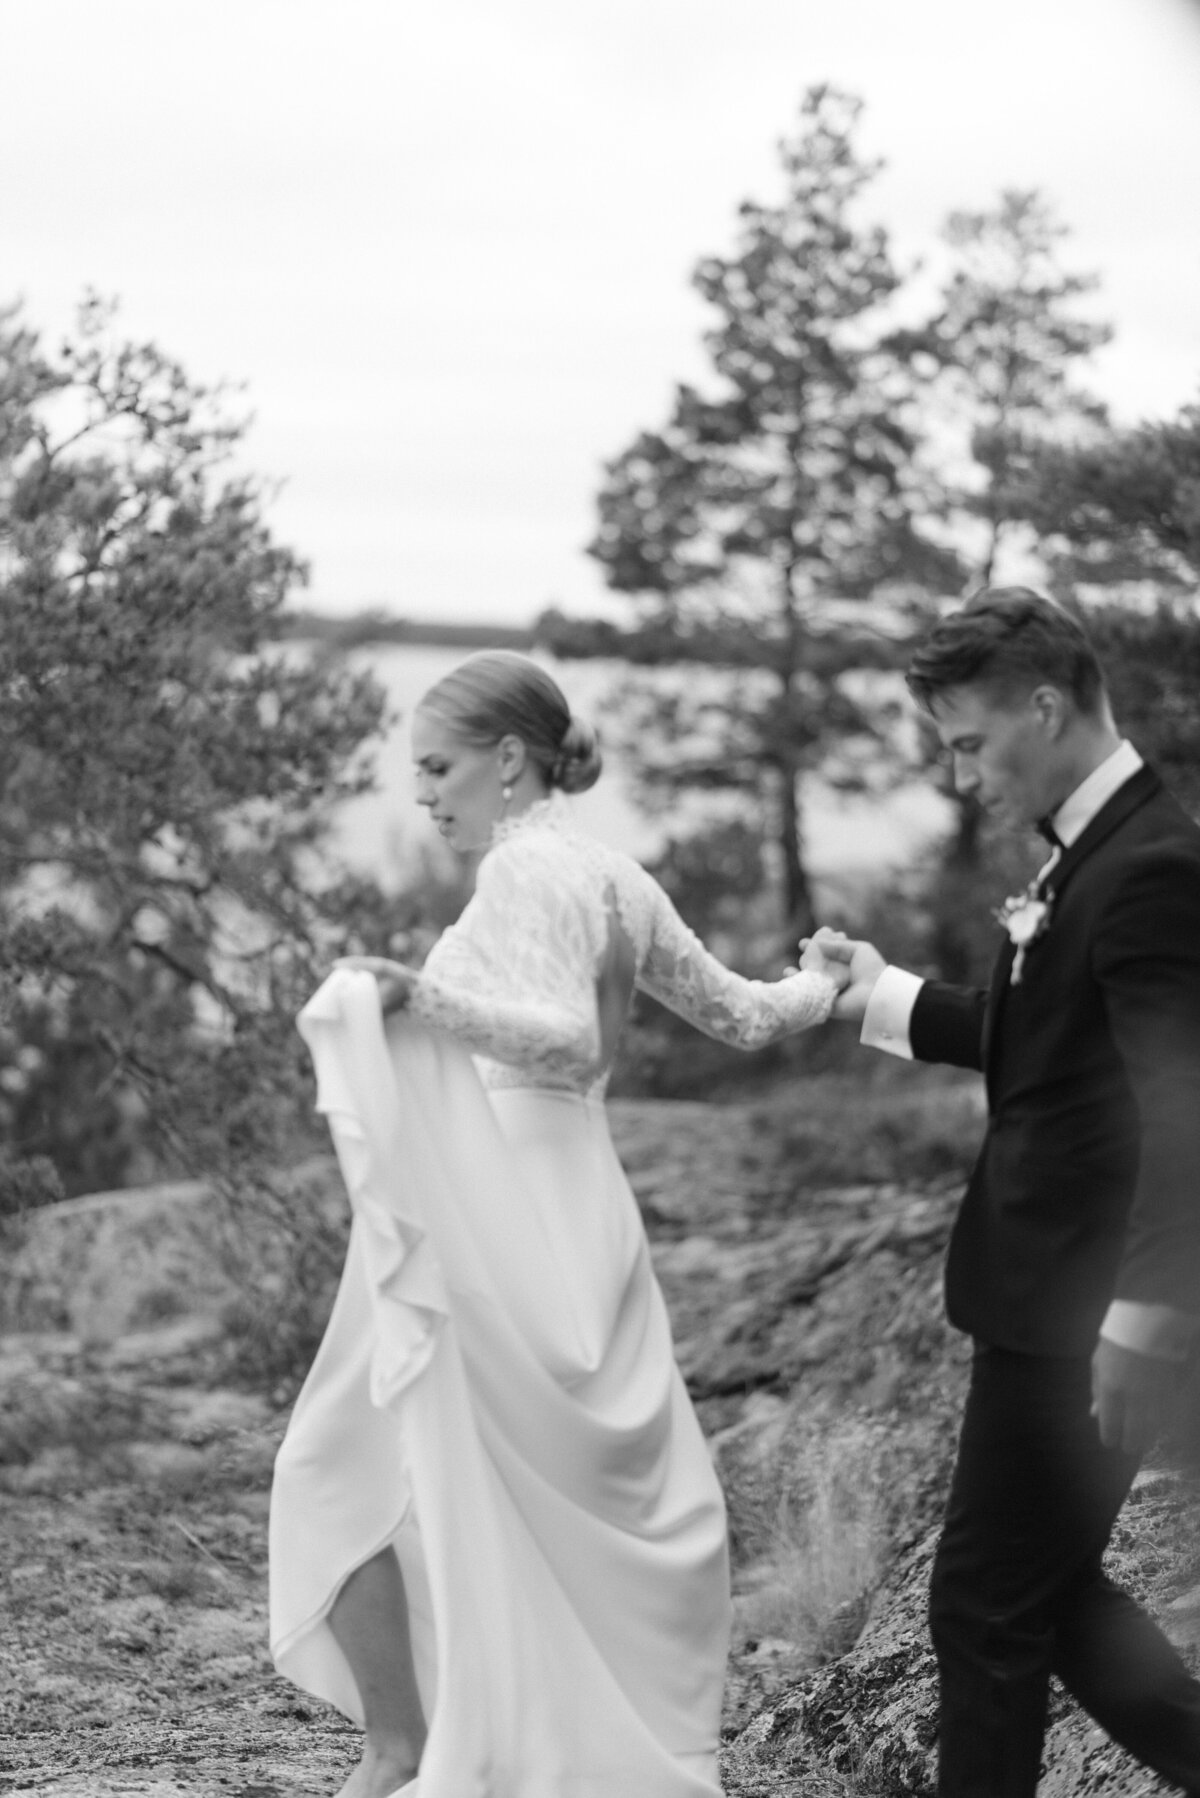 Wedding couple walking hand in hand during their wedding photography with  photographer Hannika Gabrielsson.